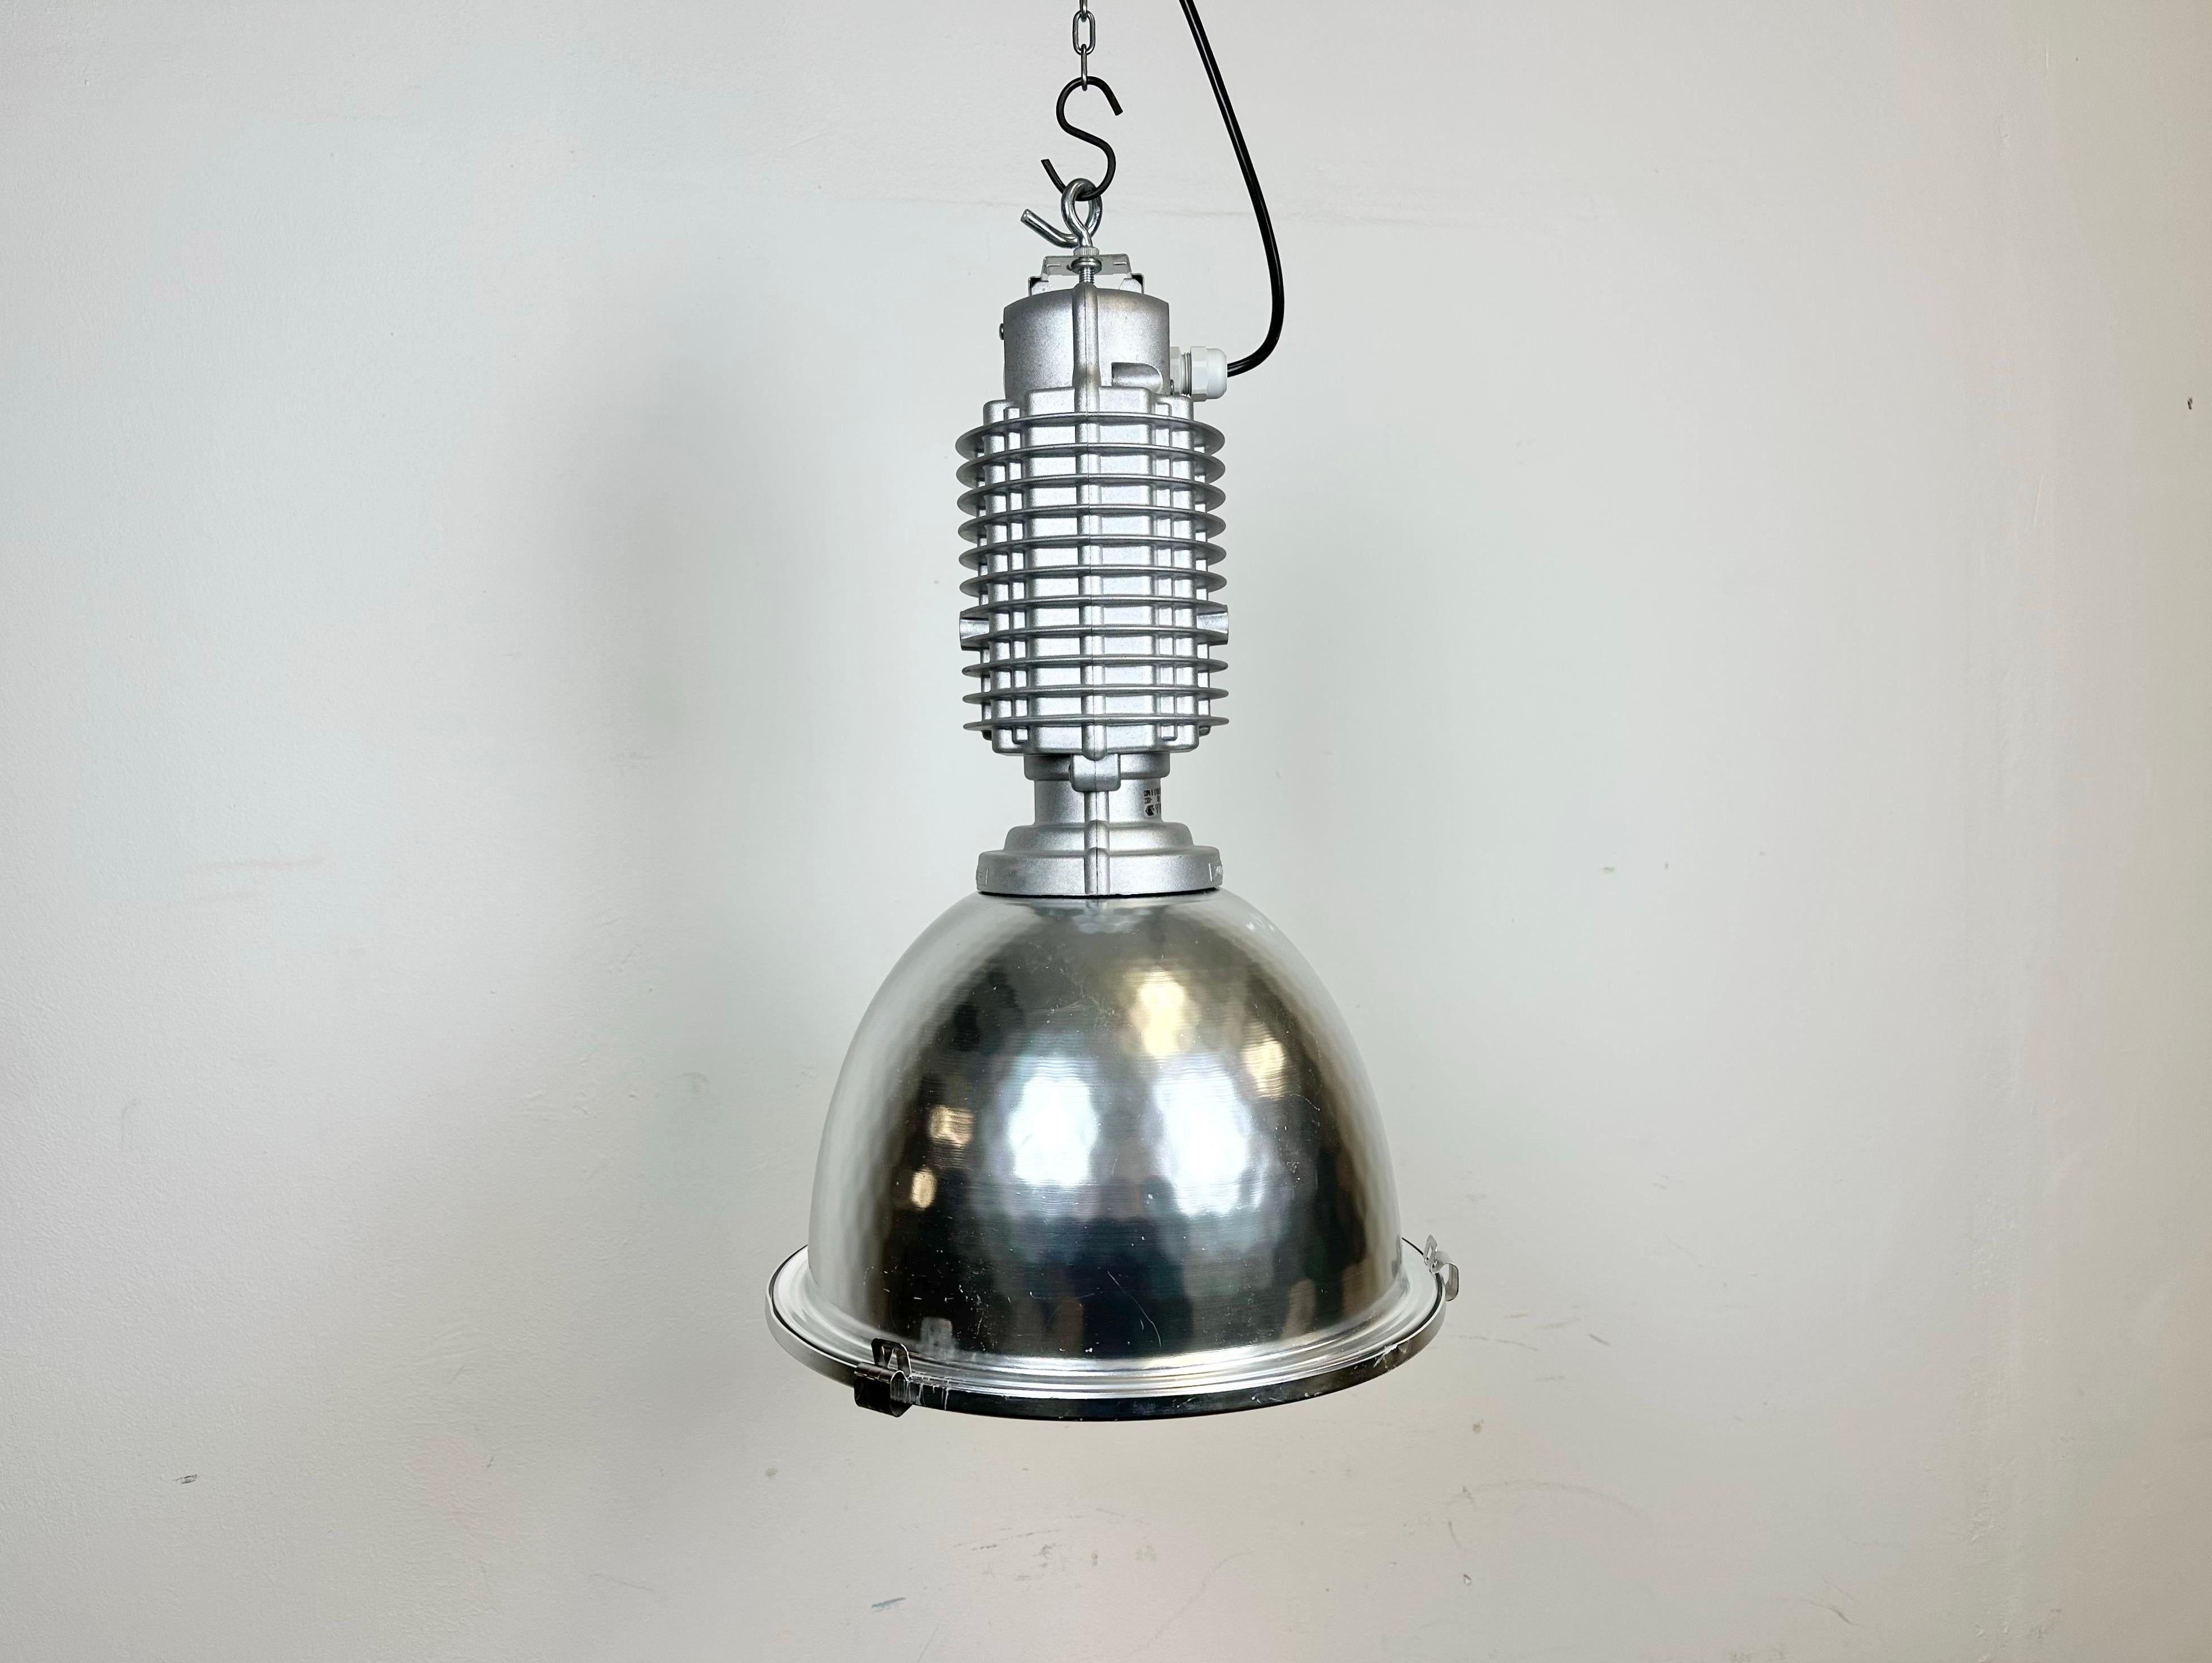 This industrial pendant lamp was designed by Charles Keller for Zumtobel Staff during the 1990s. It features a cast aluminum top and an aluminium shade with glass cover. New porcelain socket requires E27/ E26 lightbulbs. New wire. The diameter of